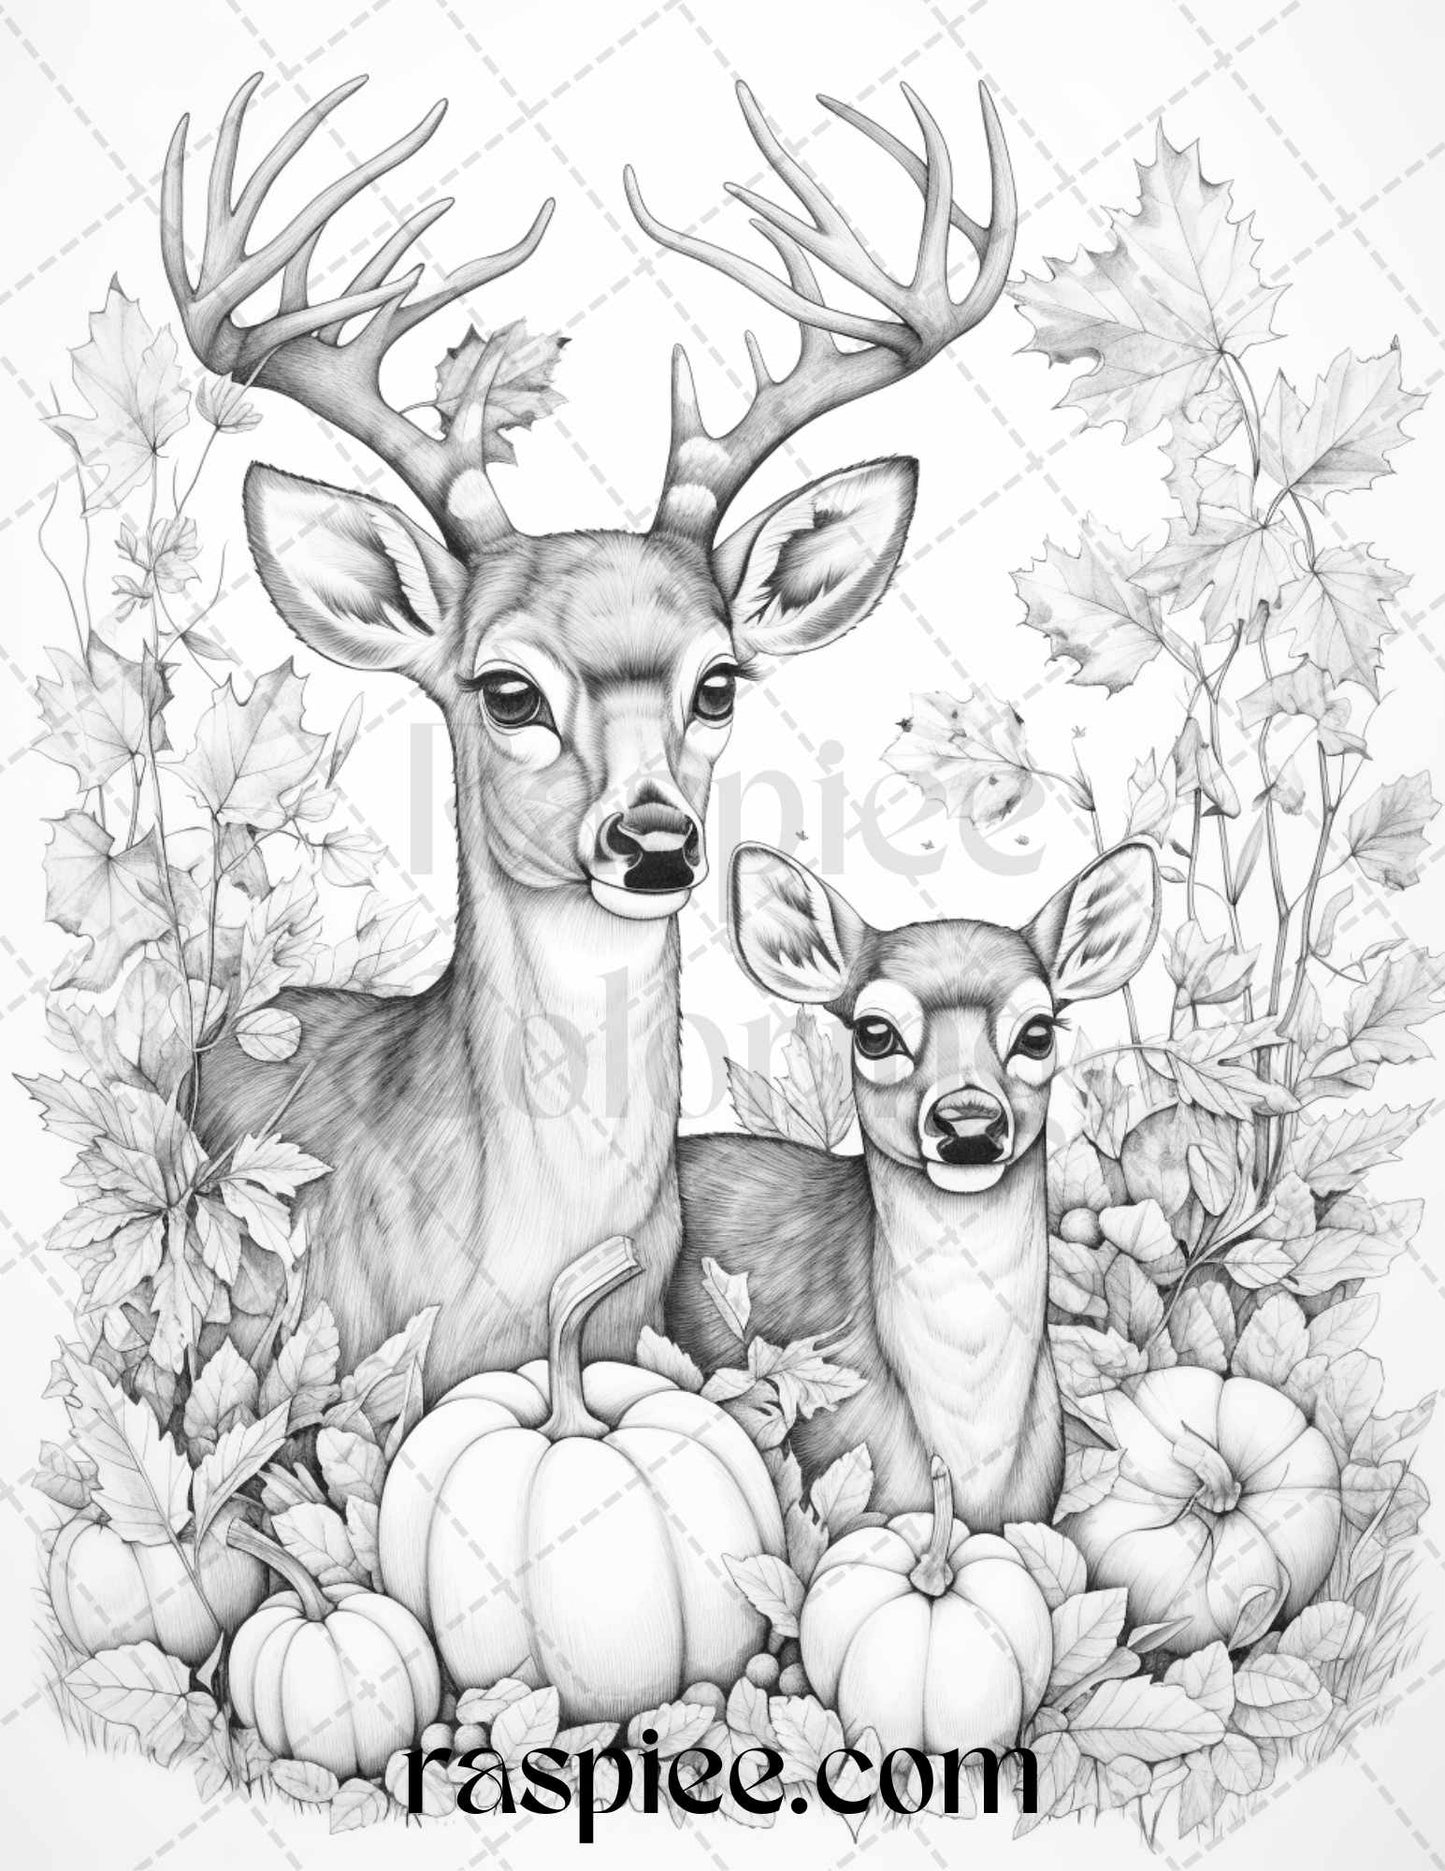 Autumn Animals Grayscale Coloring Page for Adults, Printable Fall Wildlife Coloring Sheet, Relaxing Autumn Foliage Coloring Activity, Family-Friendly Printable Coloring Sheet, High-Quality Fall Coloring Page Download, Stress-Relief Grayscale Coloring for Kids, Adult and Kids Autumn Coloring Fun